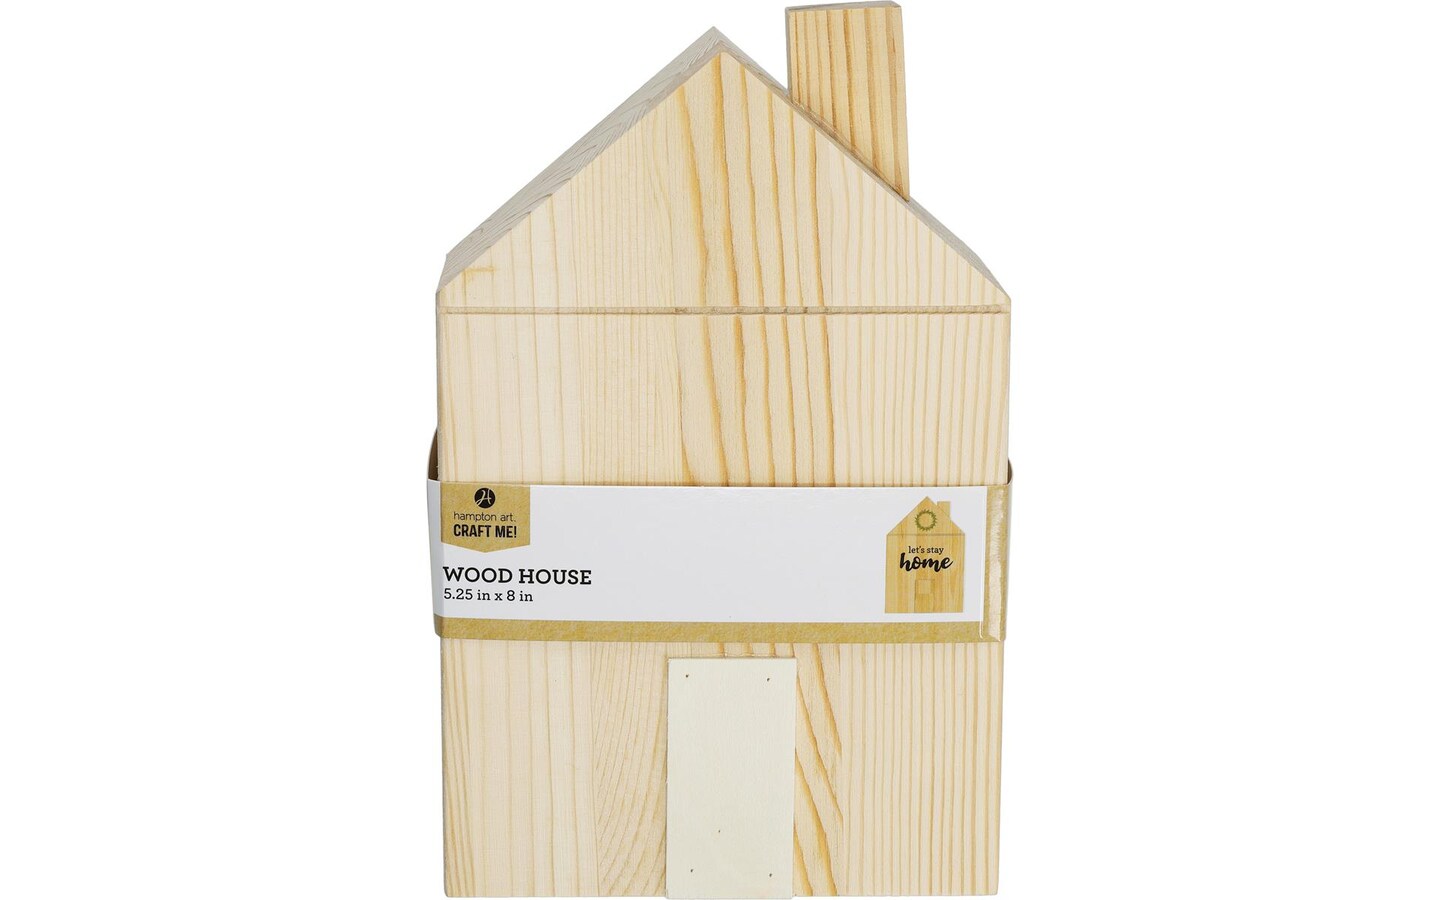 Hampton Art Craft Me! Wood House Natural with Chimney, 5.25&#x22; x 8&#x22;, natural pine, customize by painting, staining, embellishing or decorating it, for home decor, table settings and more